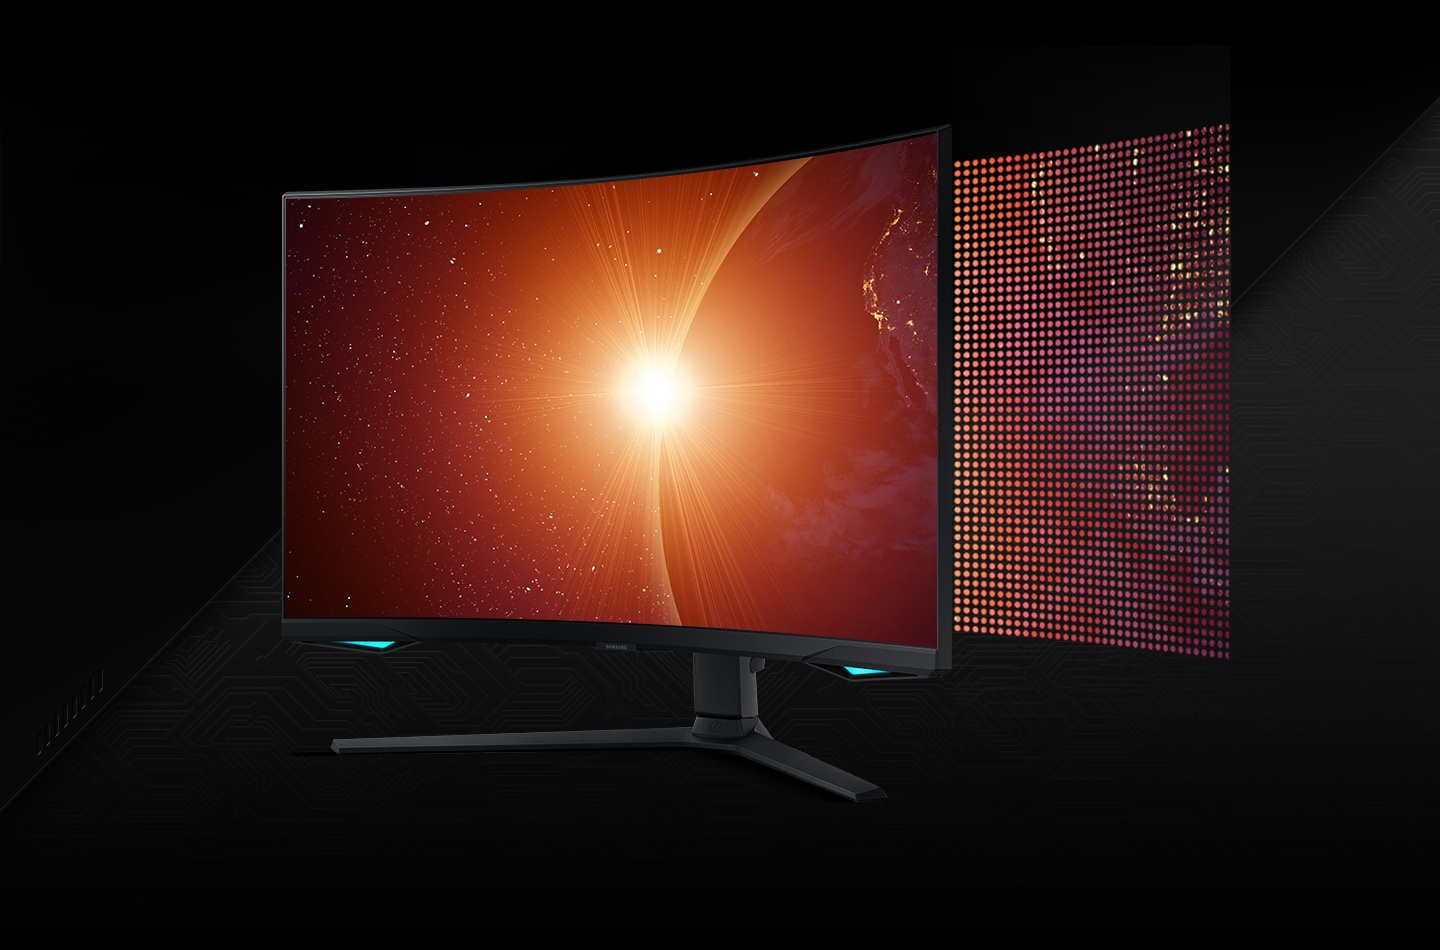 A video shows a split monitor screen with ""Edge LED"" on the left with a few large dots and ""Quantum Mini-LED"" on the right with many small dots. The left then shows ten local dimming zones and the right with 1,194. A shining star then appears on the screen as the monitor rotates to its left.